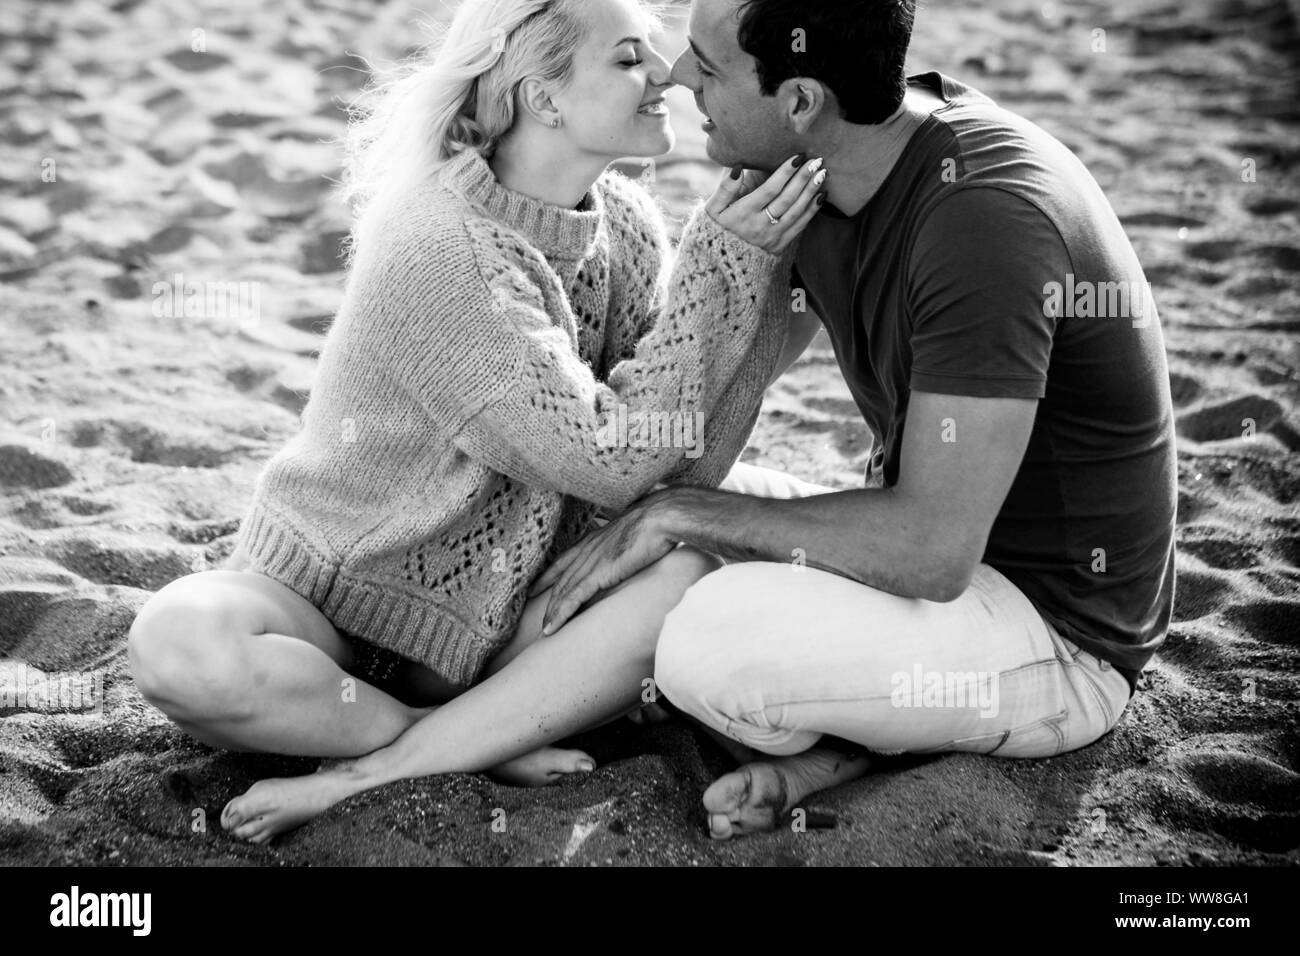 beautiful model couple caucasian young lady and man stay in love hugging and sitting on the beach, blonde and black hair in relationship outdoor leisure activity, love and youthful attractive people Stock Photo